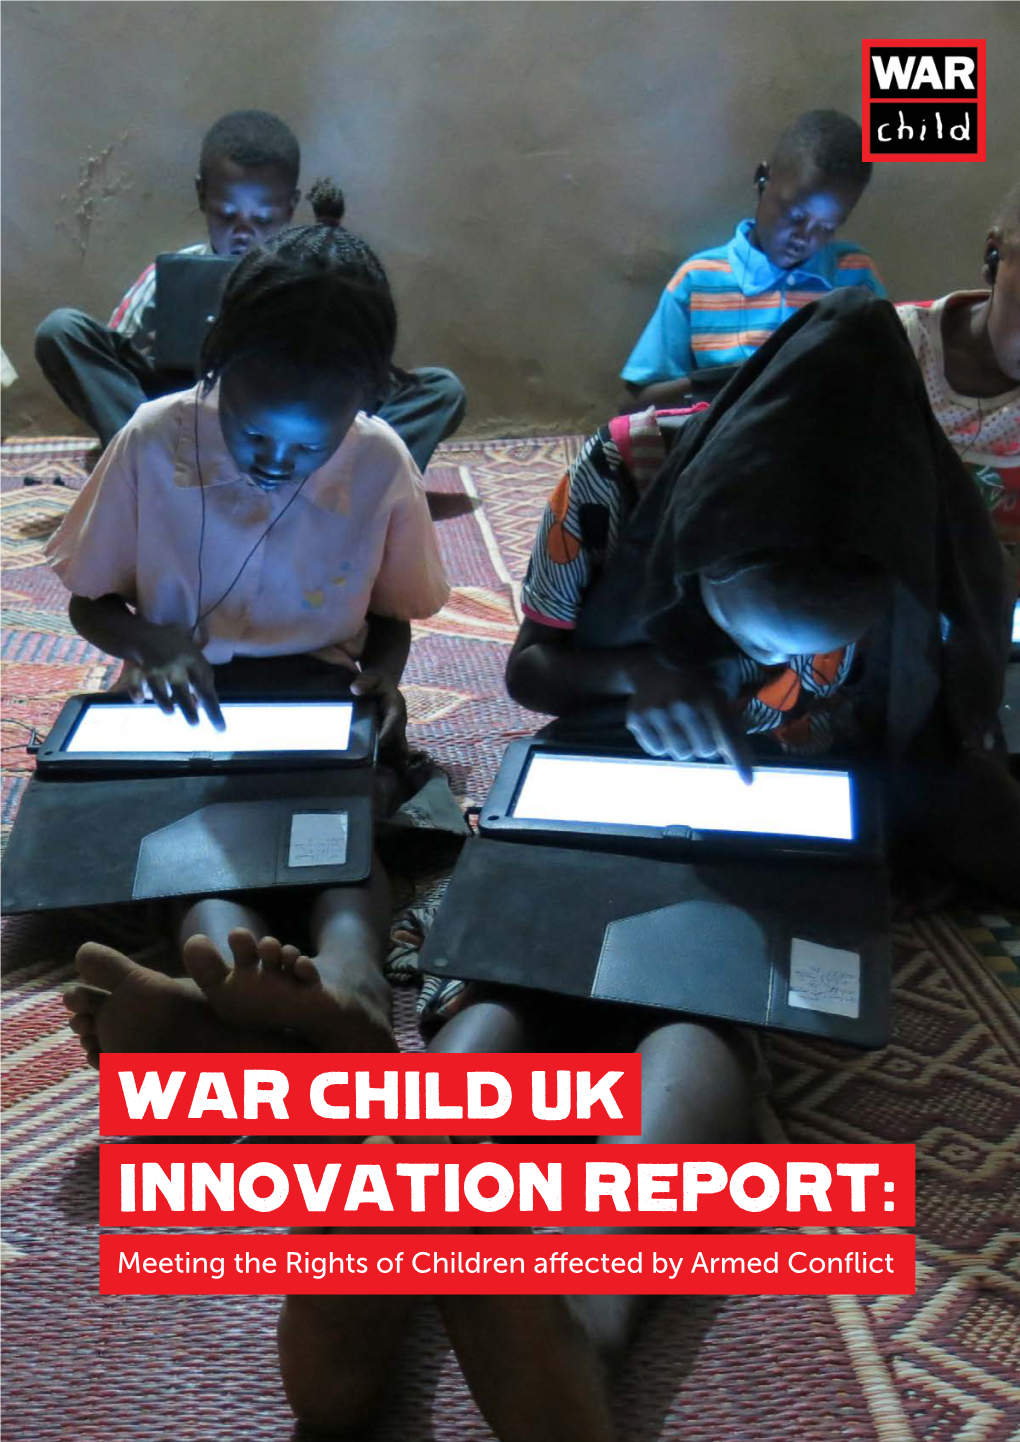 WAR CHILD UK INNOVATION REPORT: Meeting the Rights of Children Affected by Armed Conflict